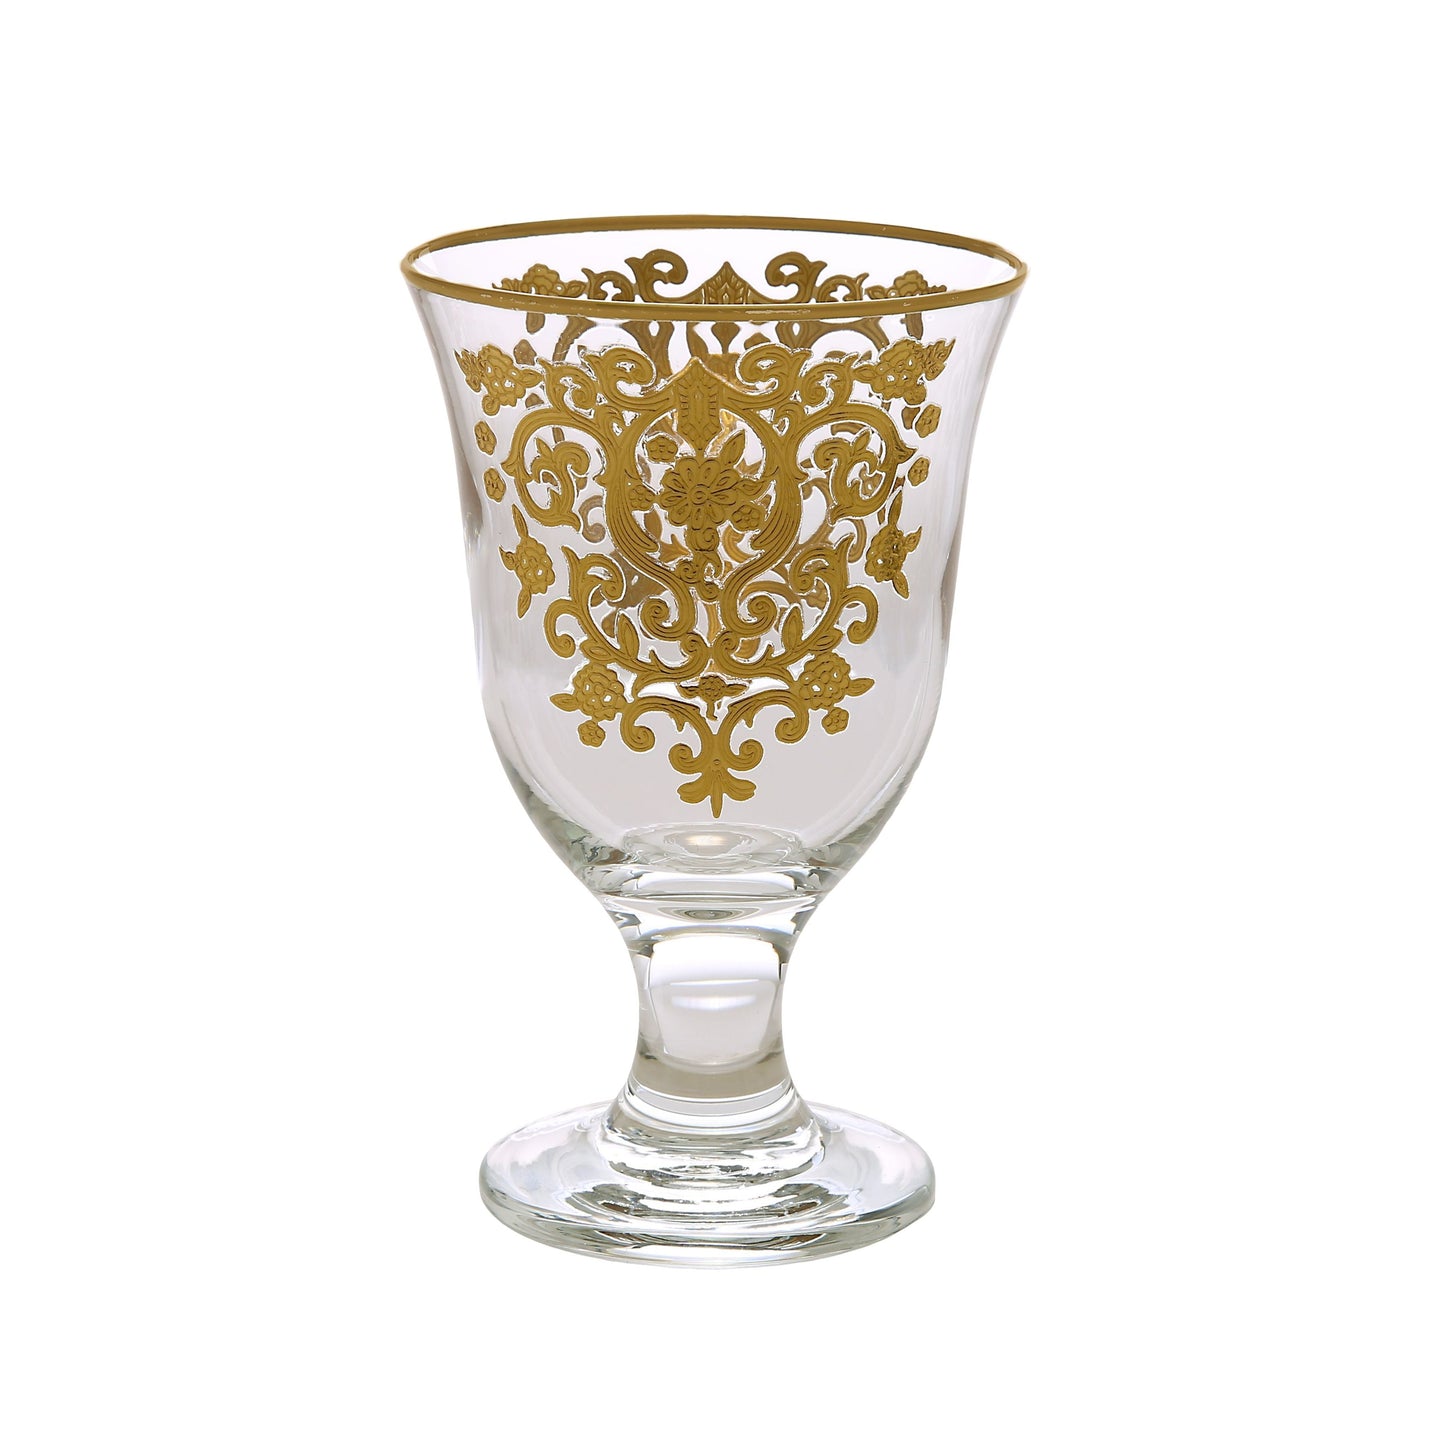 Classic Touch Set Of 6 Short Stem Glasses With Rich Gold Artwork, 5"